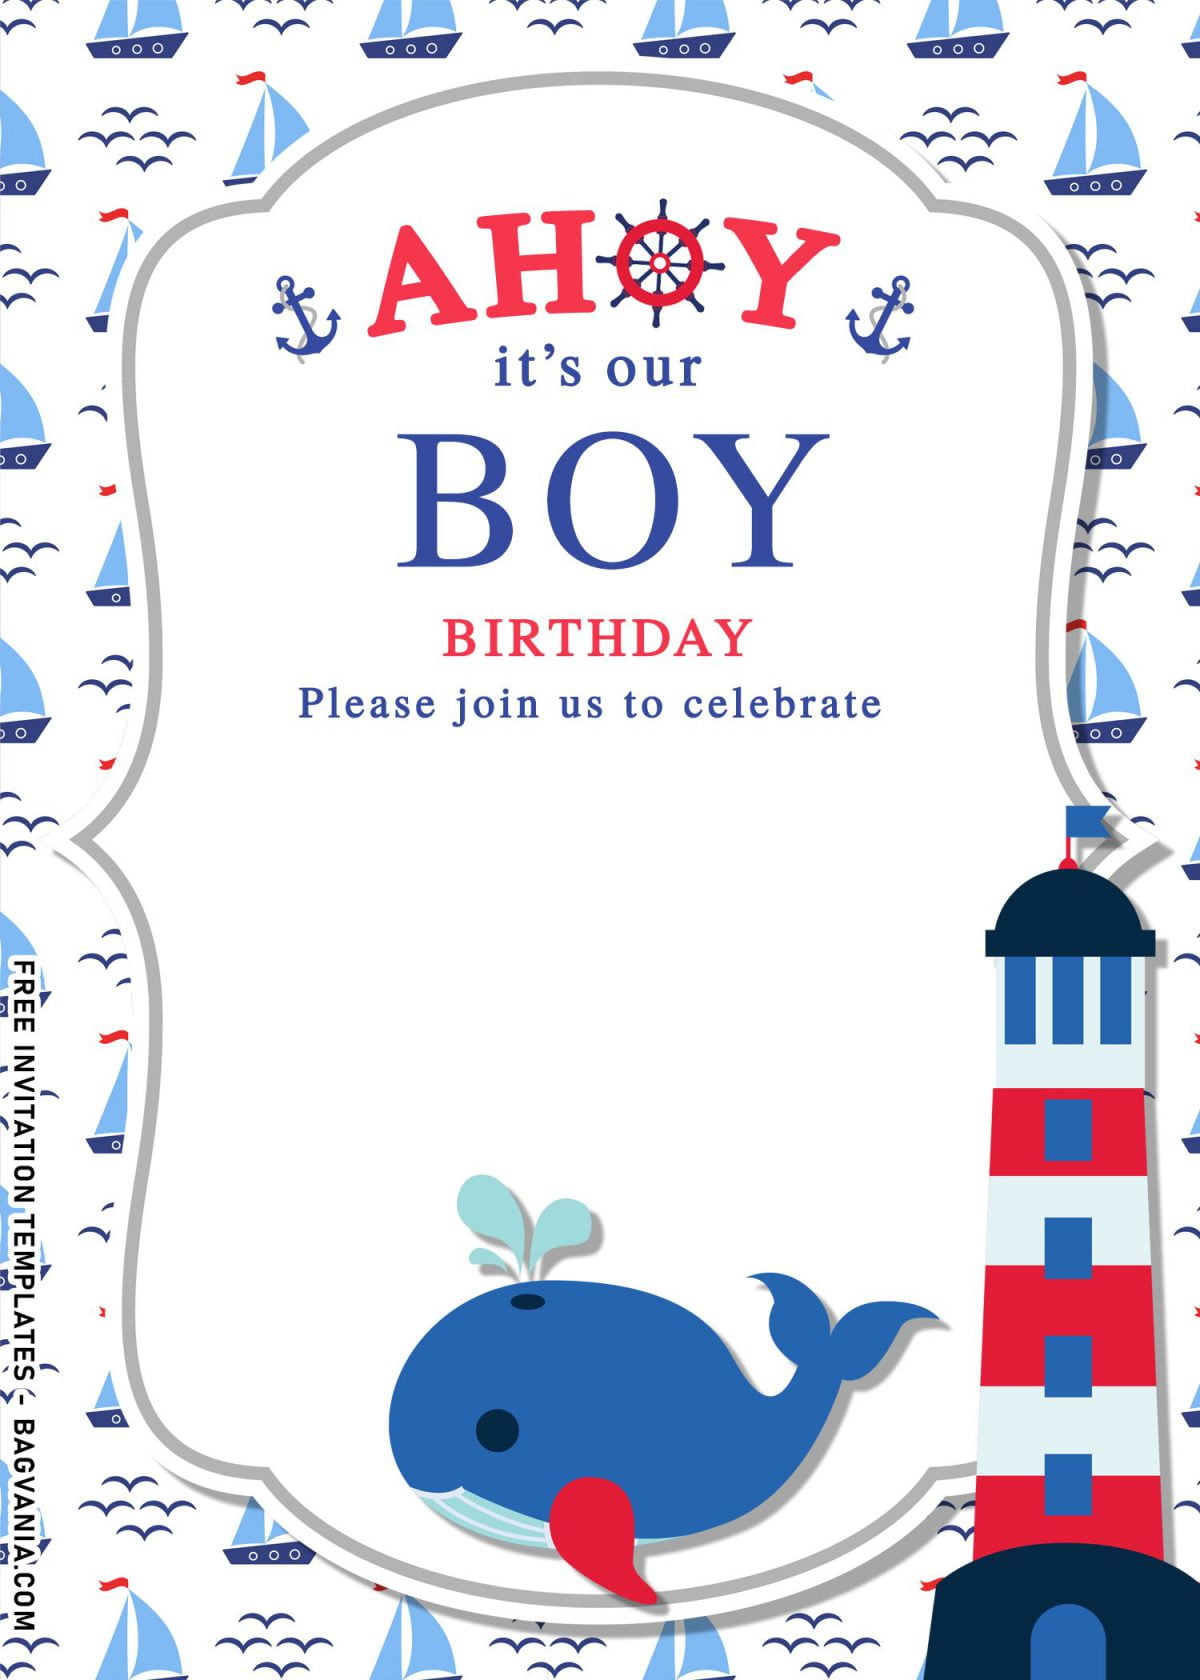 11+ Nautical Themed Birthday Invitation Templates For Your Kid’s Birthday Bash and has portrait design